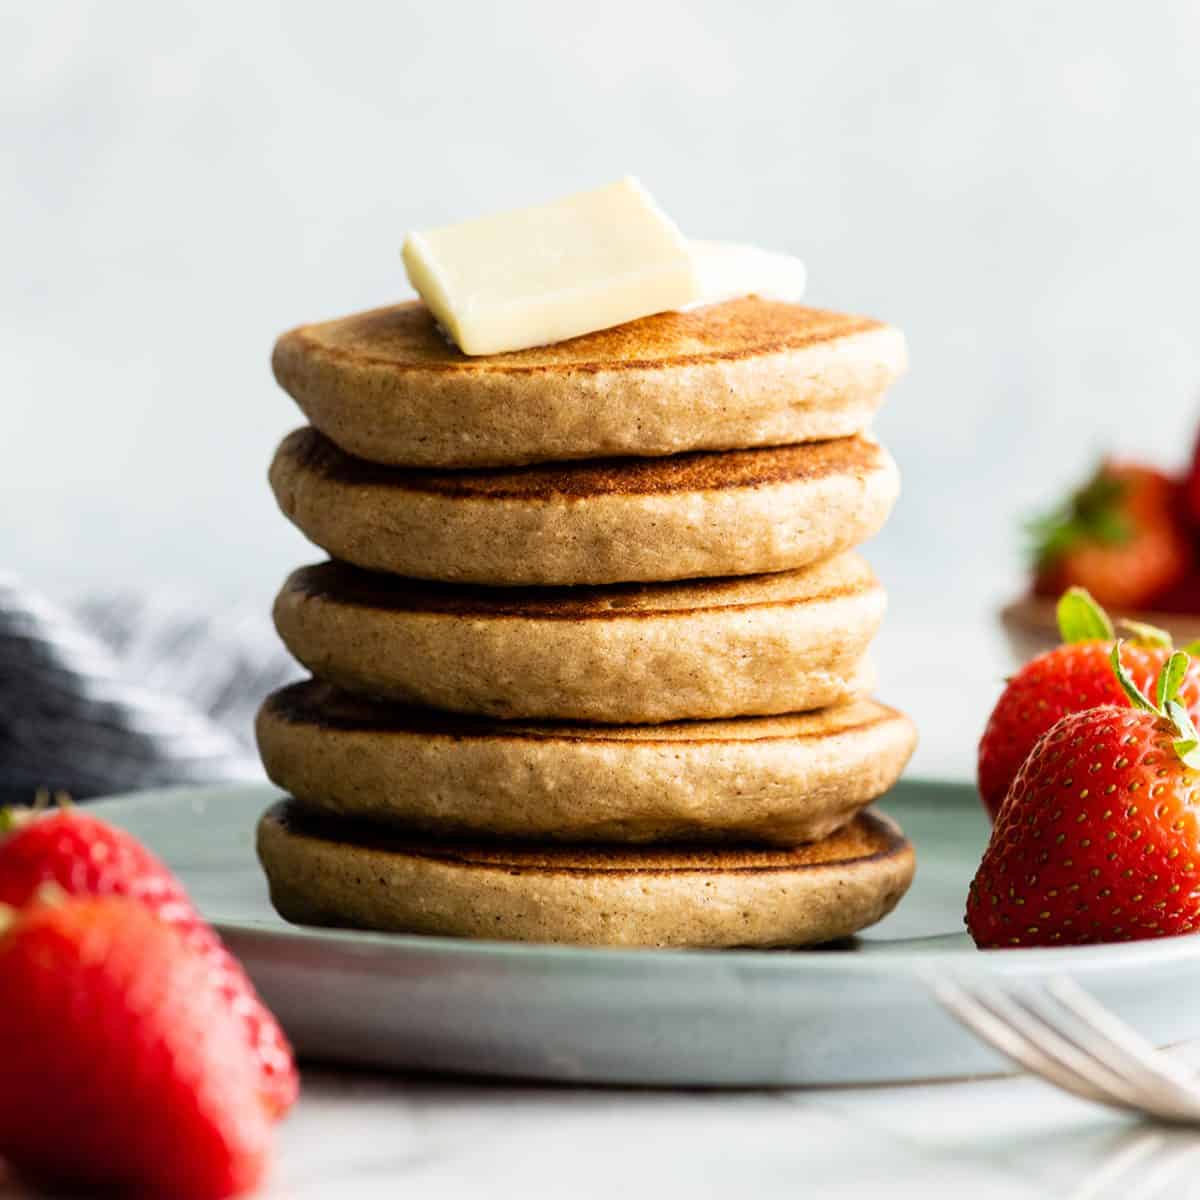 a stack of 5 banana oatmeal pancakes with butter on top and strawberries on the side